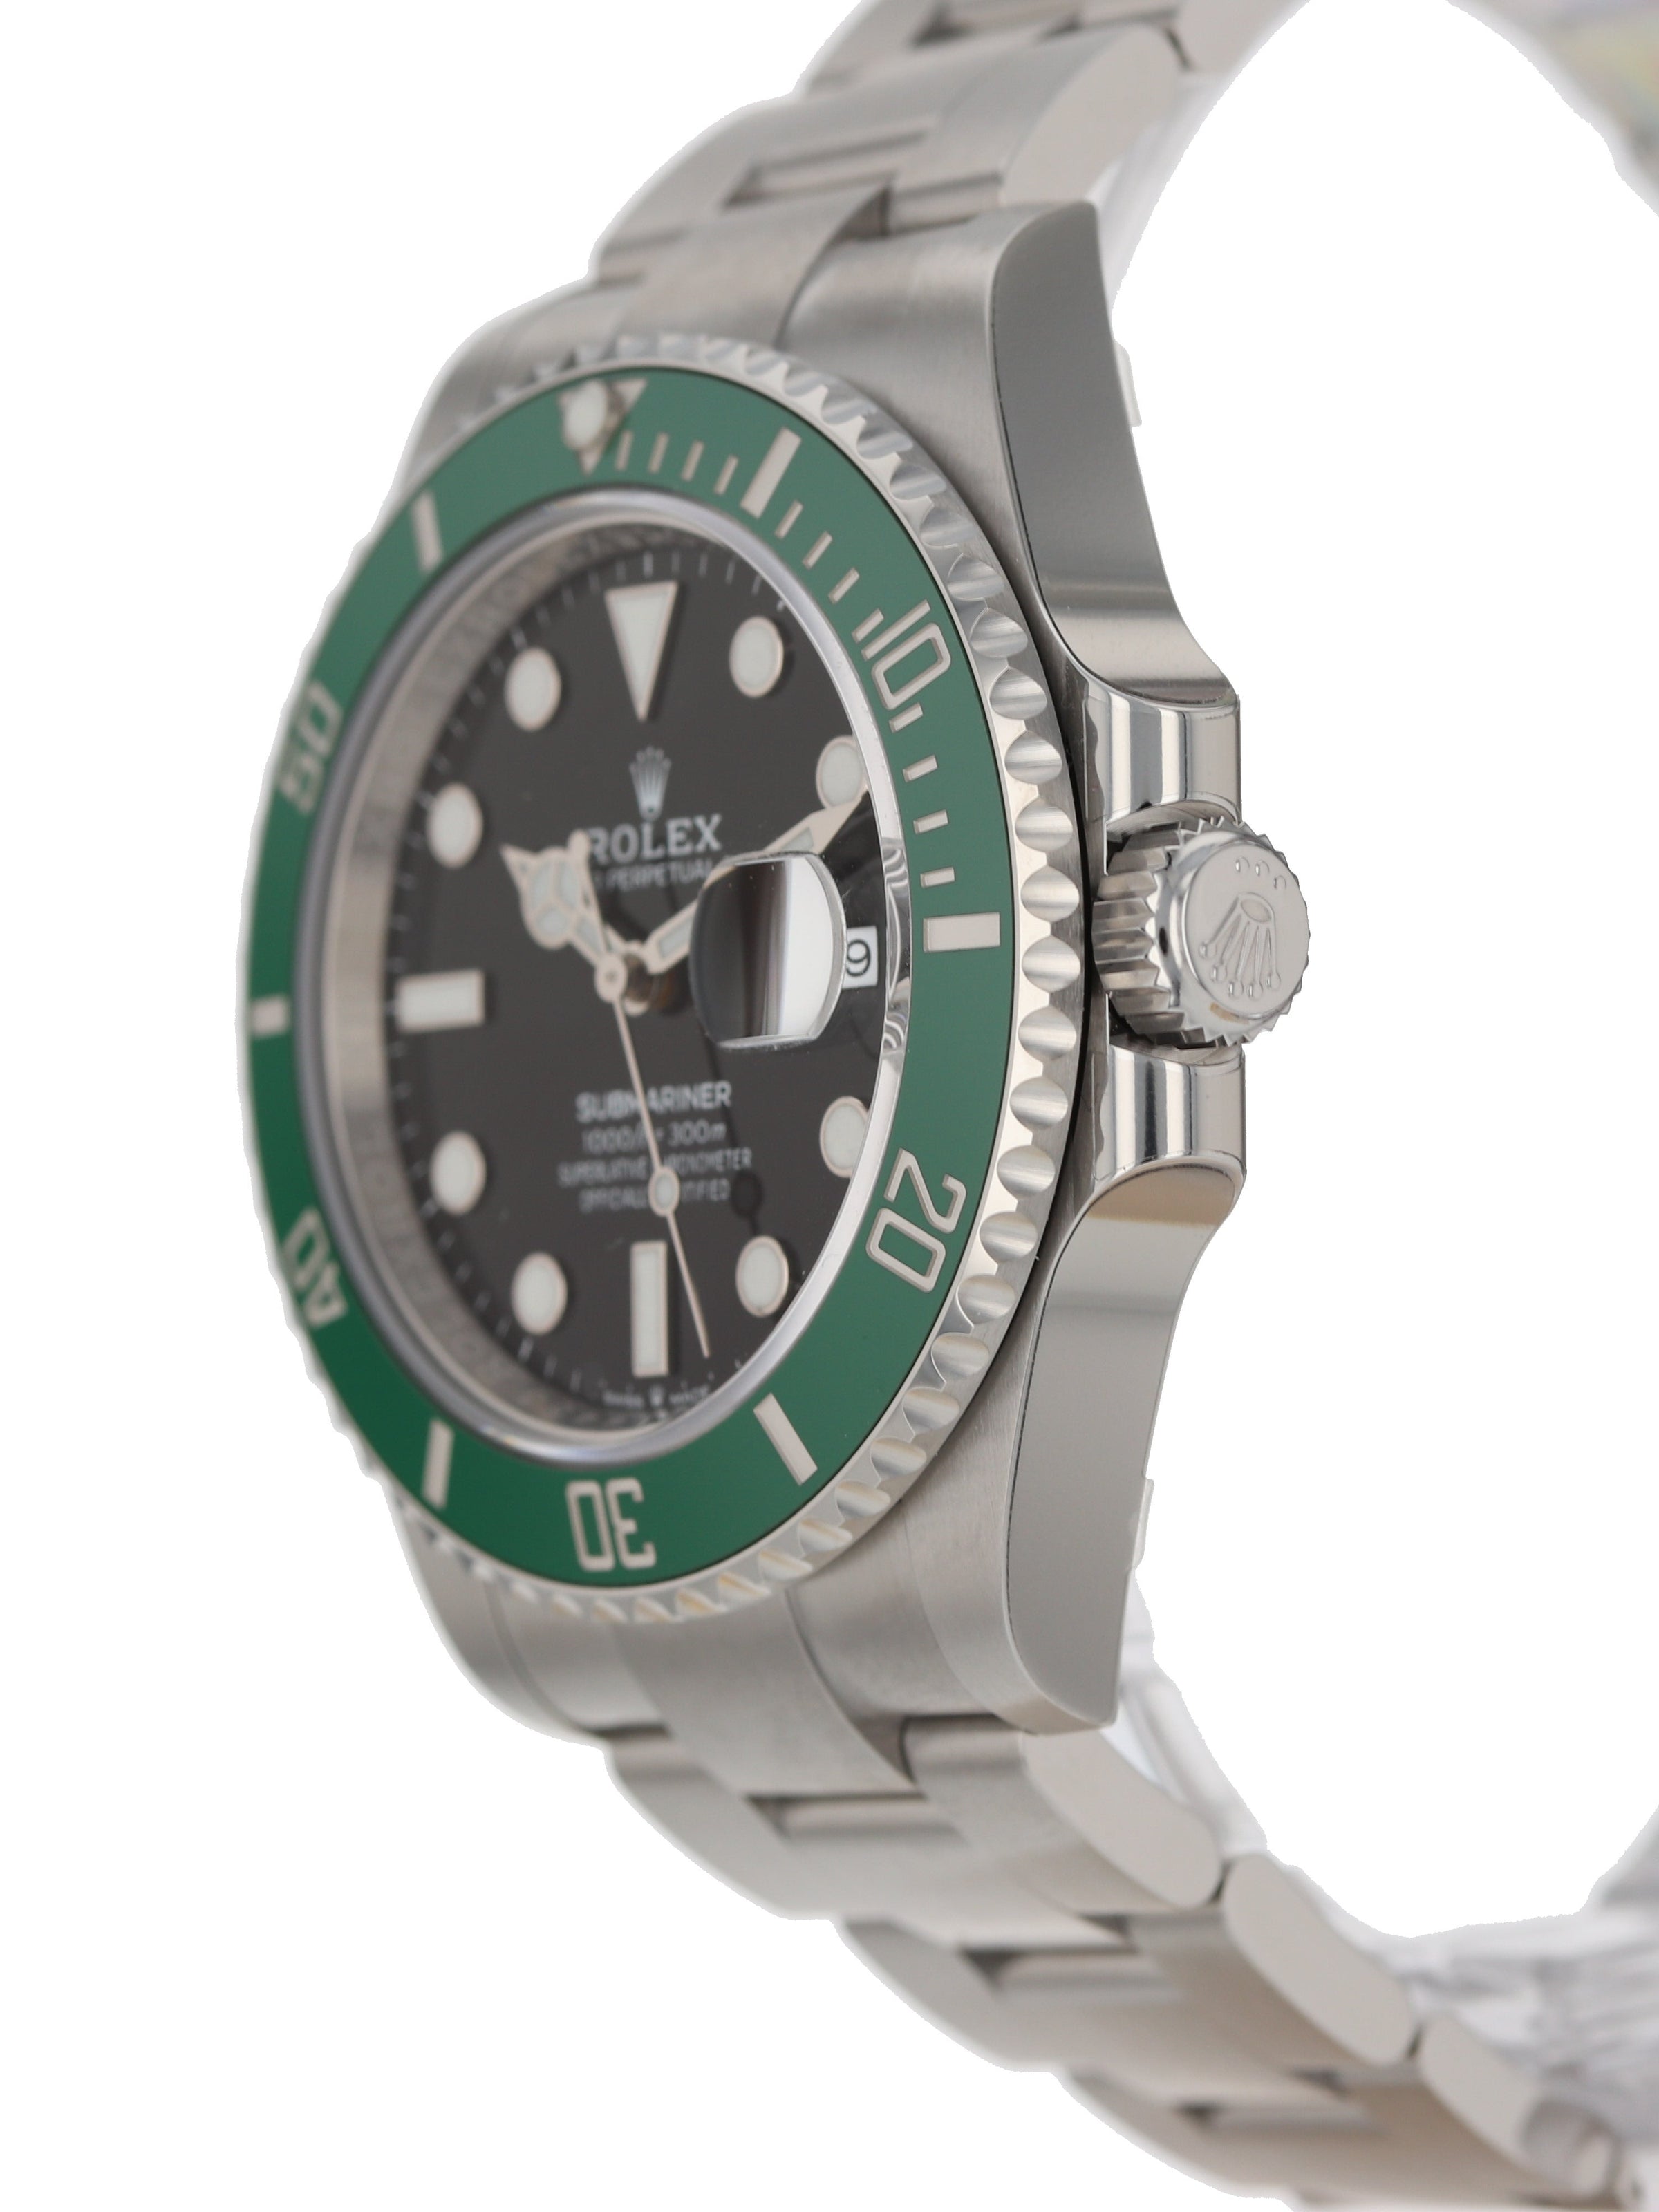 Rolex Submariner 126610LV Starbucks Watch  S.Song Vintage Timepieces –  S.Song Watches